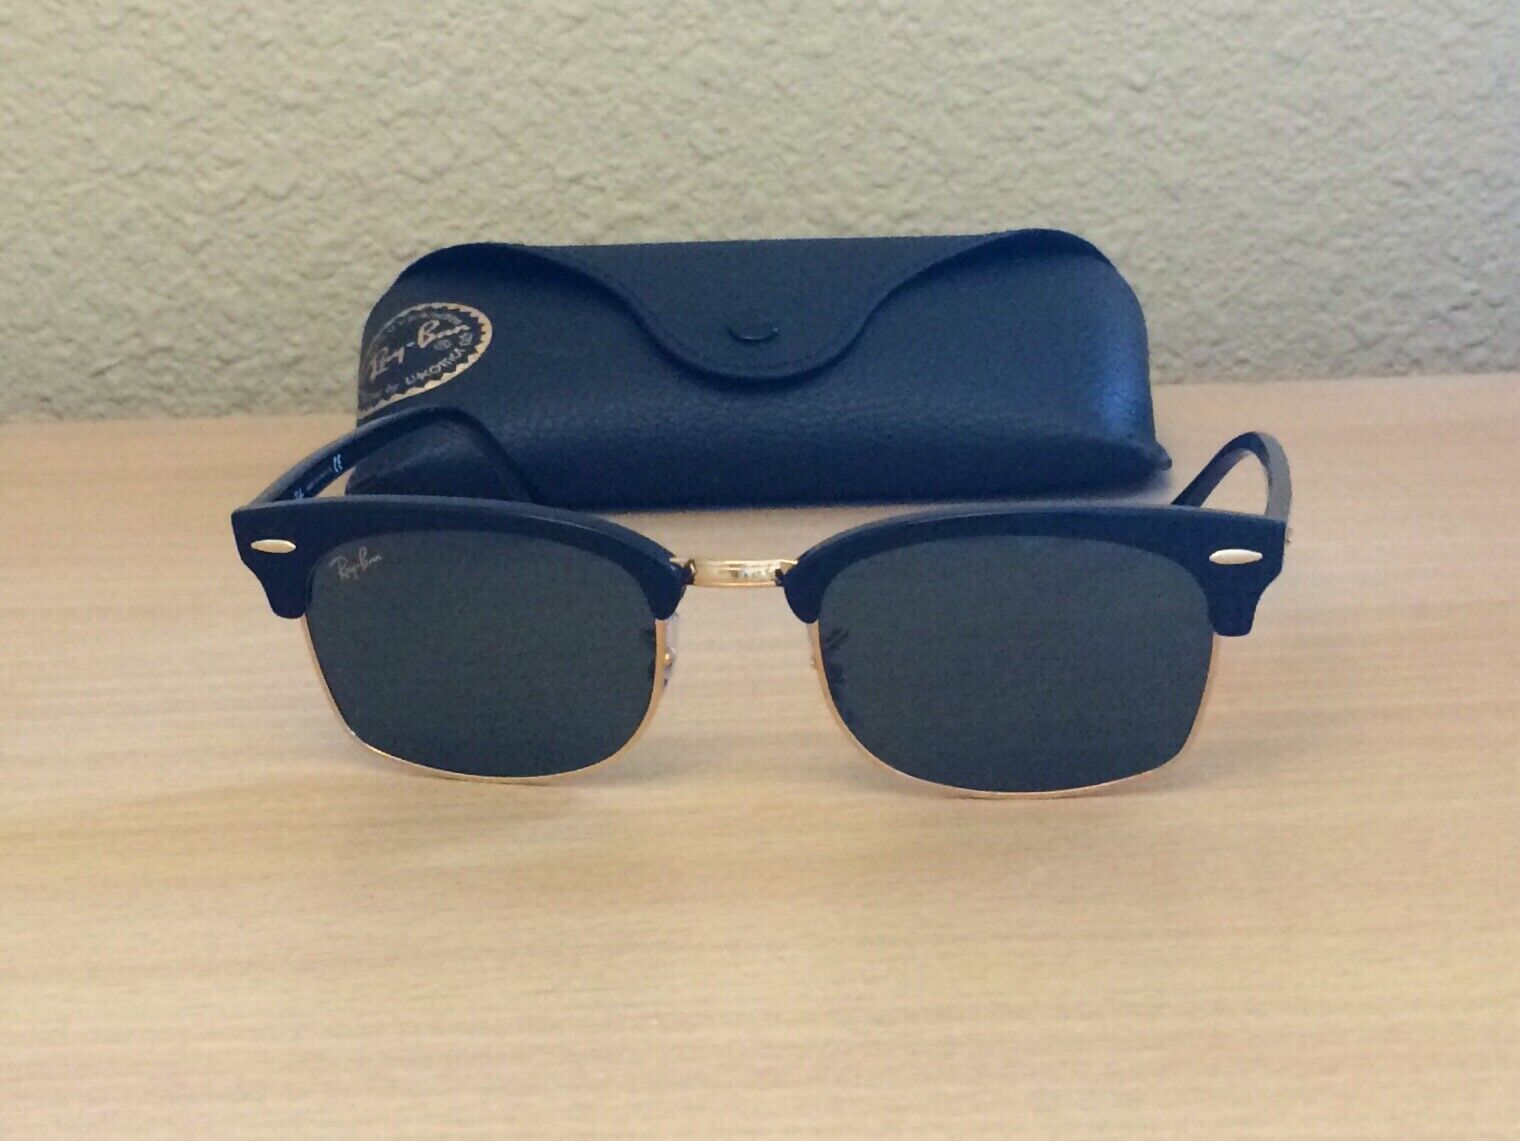 NEW Ray-Ban Sunglasses RB 3916 130431 CLUBMASTER 